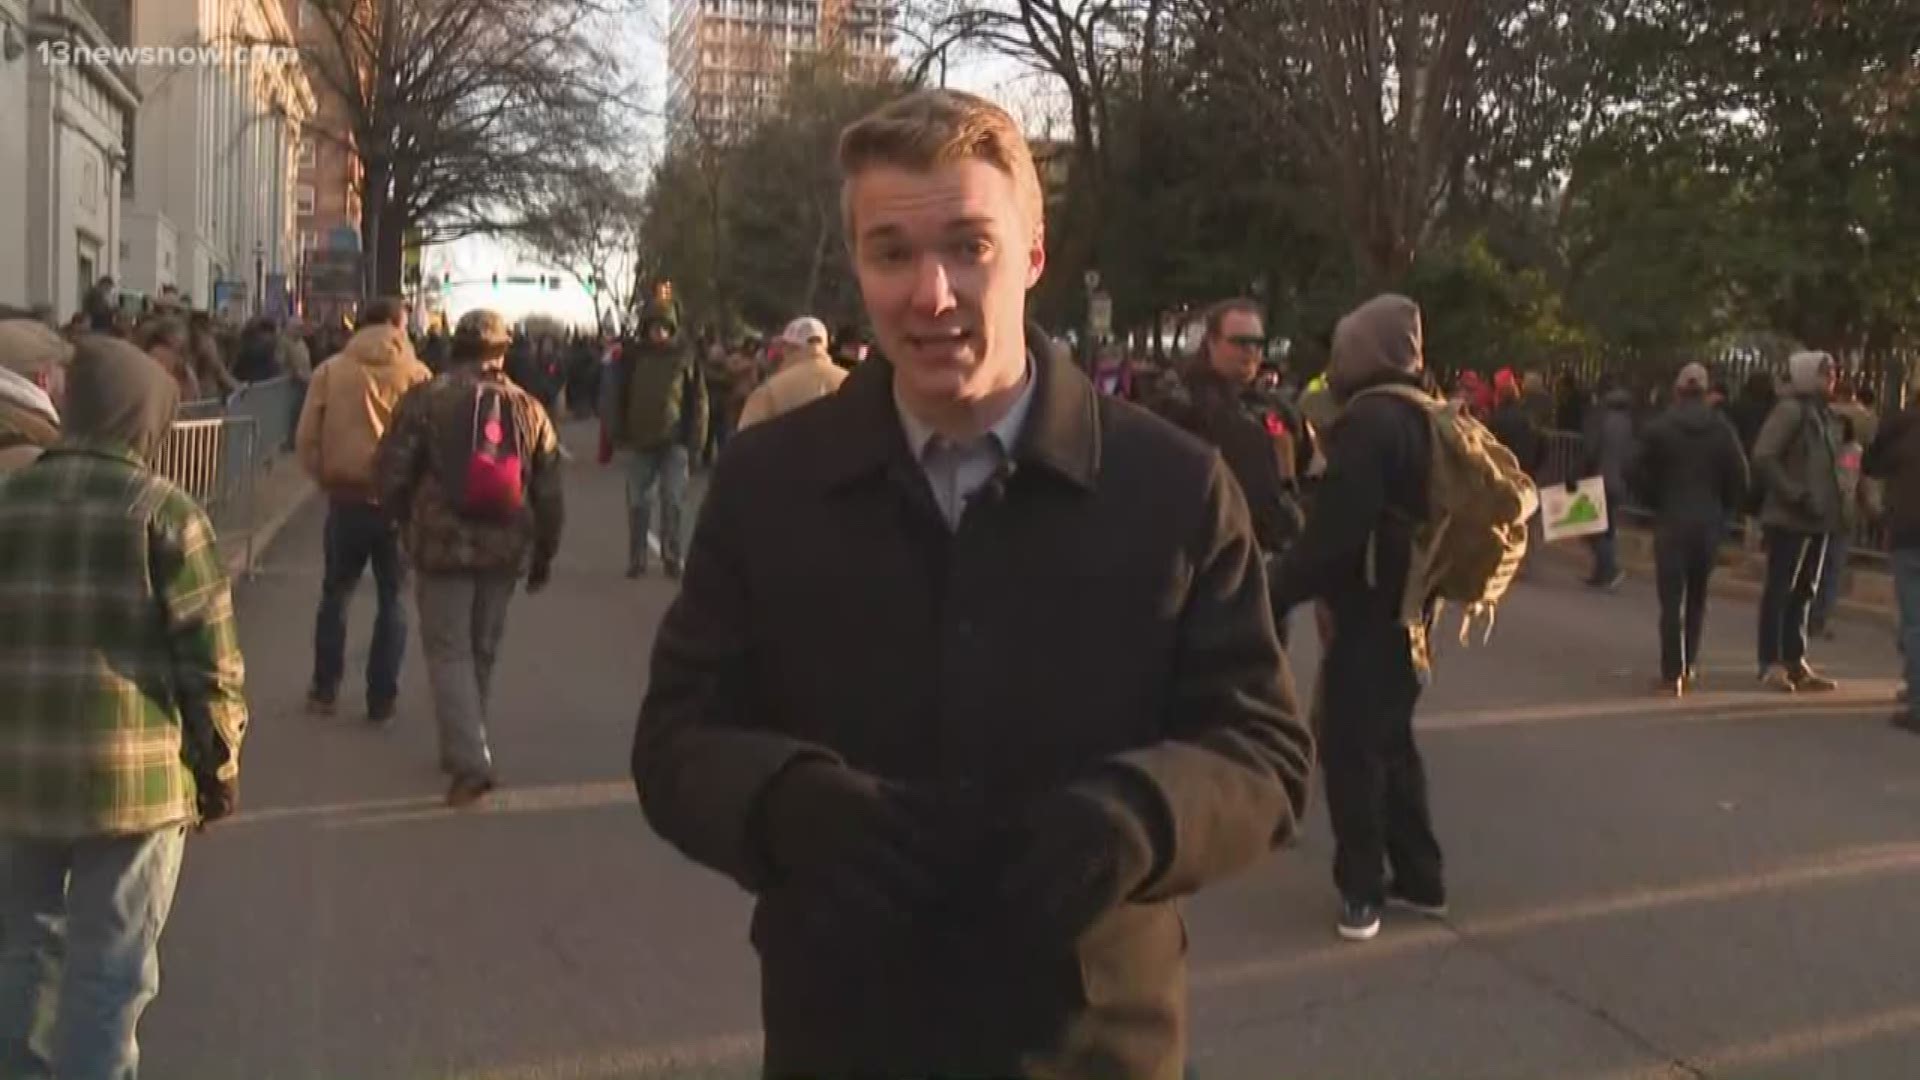 Thousands of people are at the capitol in Richmond, rallying against gun control. 13News Now reporter Evan Watson gives us a look at the protest so far.